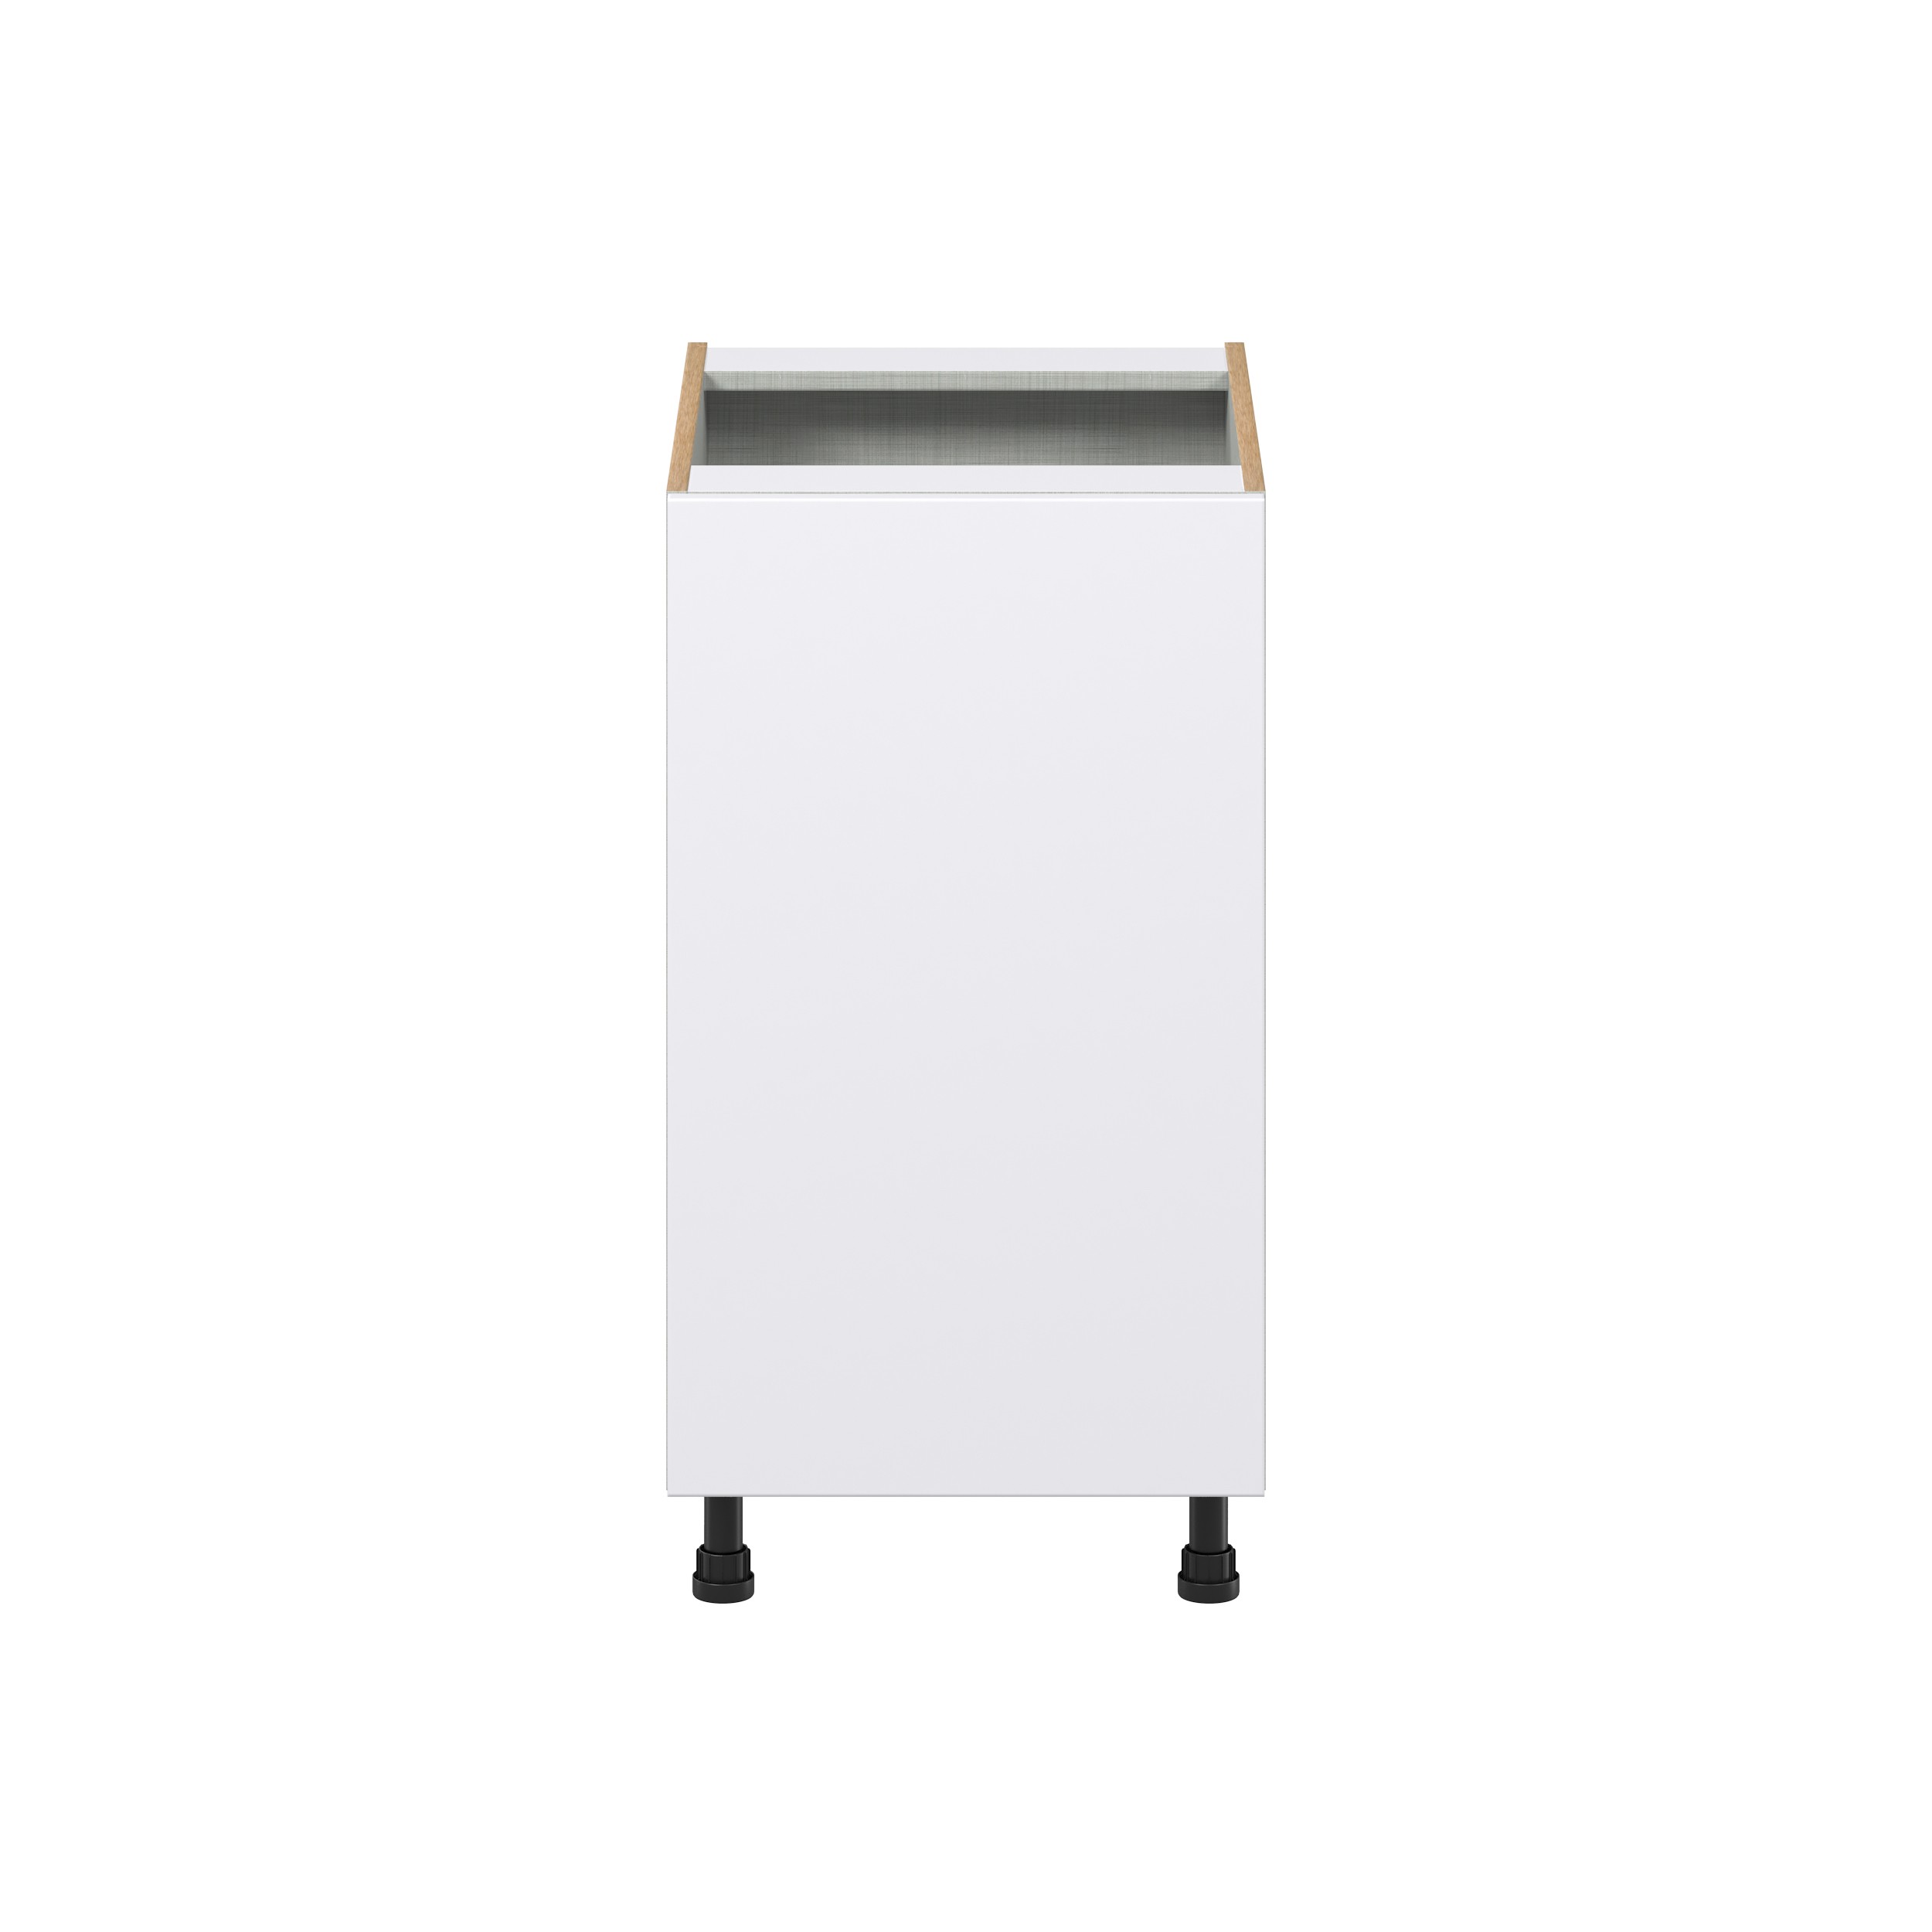 Lily Bright White Slab Assembled Full High Door with 2 Pull Out Waste Bin Kitchen Cabinet (18 in. W x 34.5 in. H x 24 in. D)